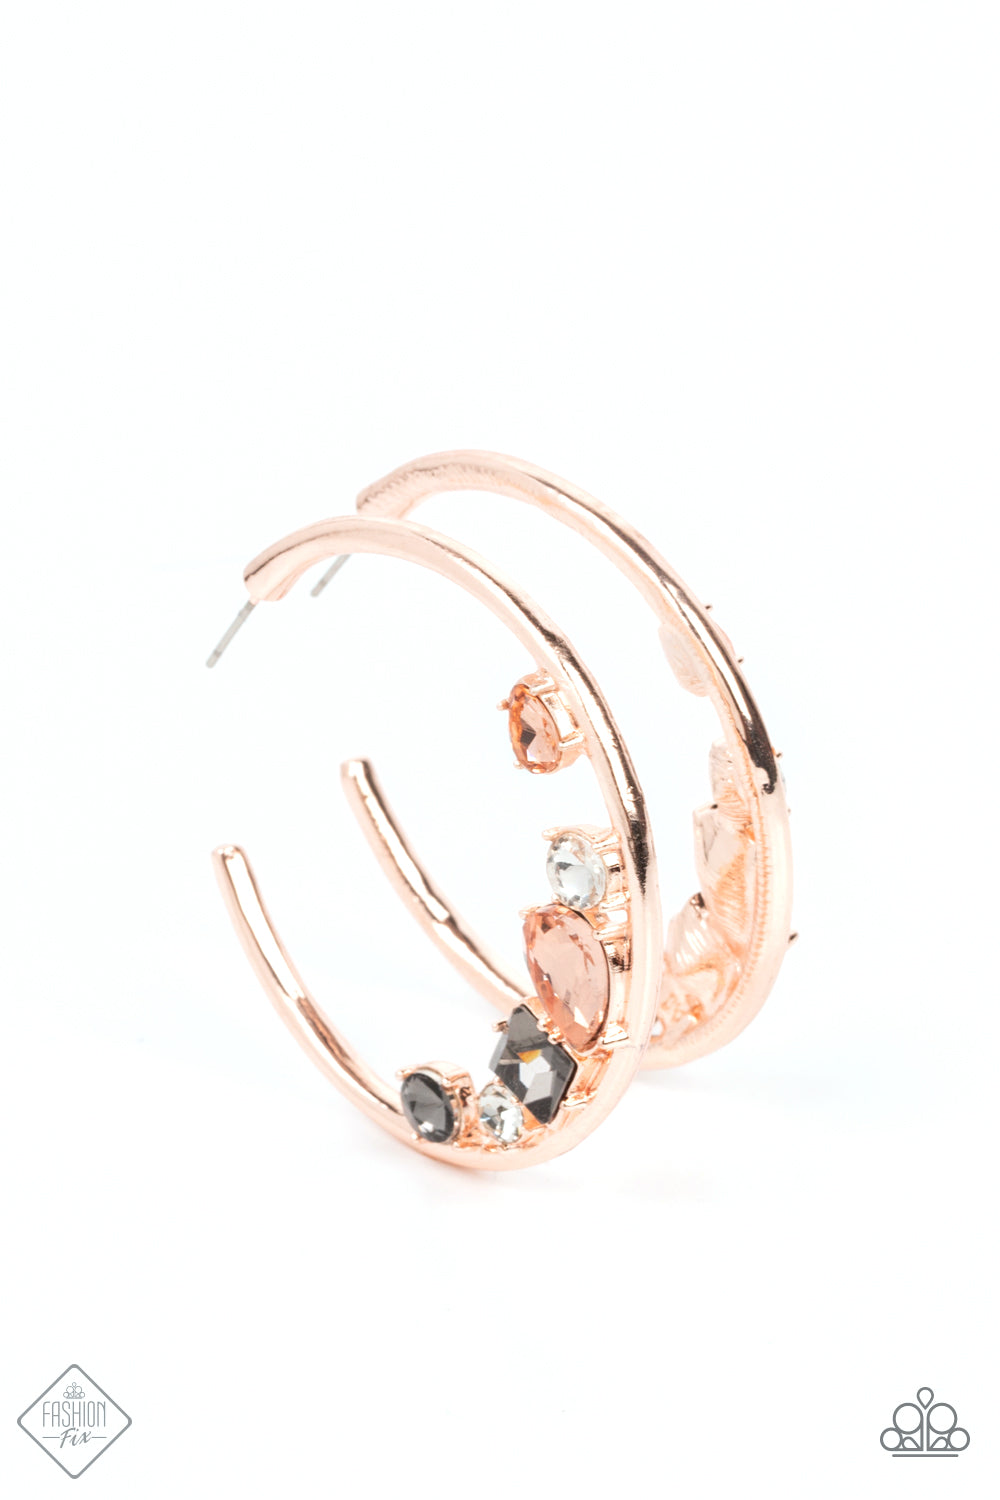 Attractive Allure Rose Gold Hoop Earrings Paparazzi